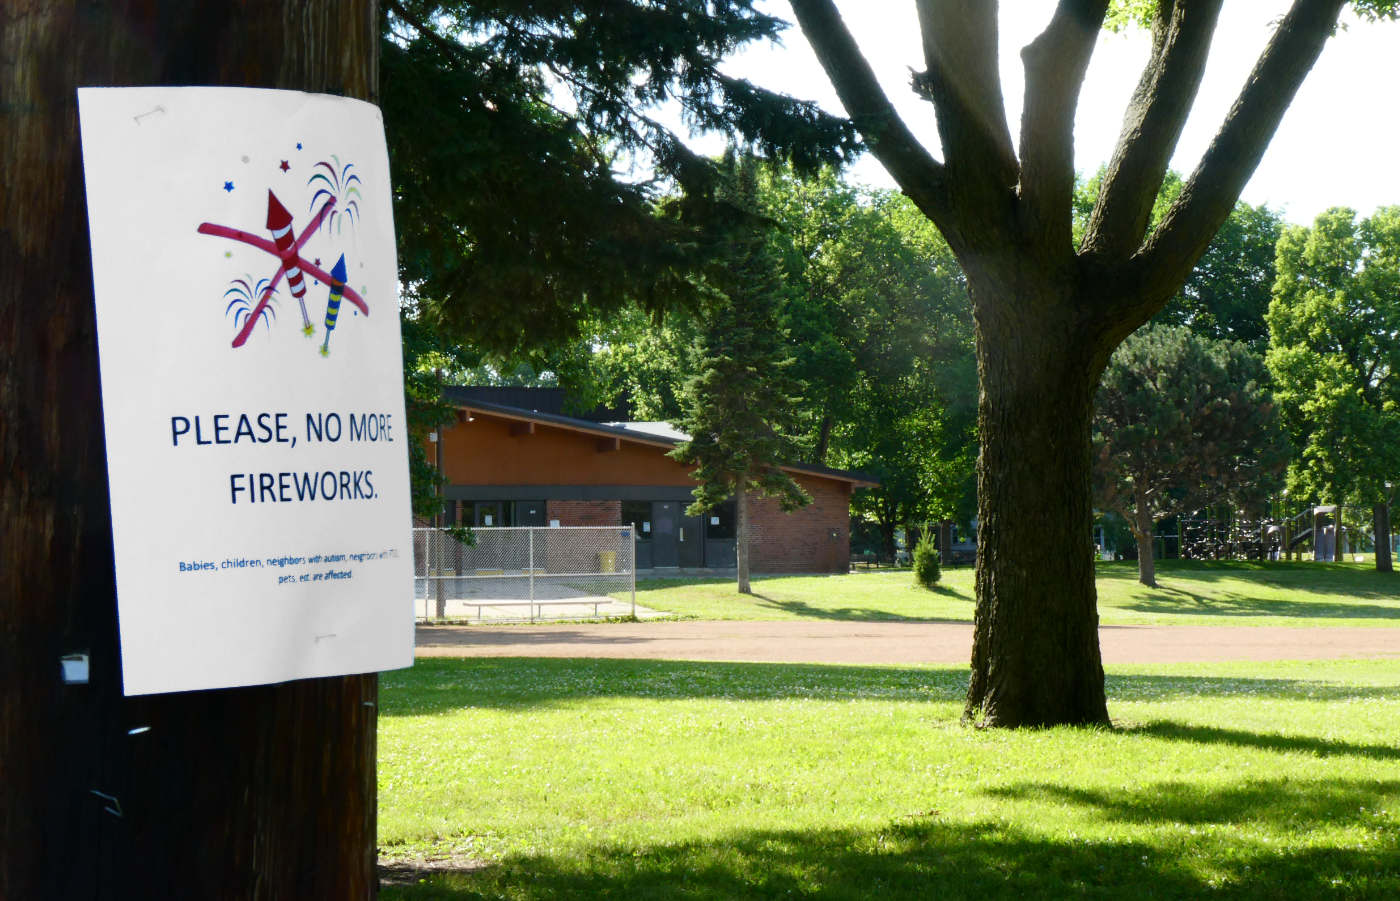 Sunny park scene with a flyer on a tree reading "Please, no more fireworks." with a red X over graphics of fireworks